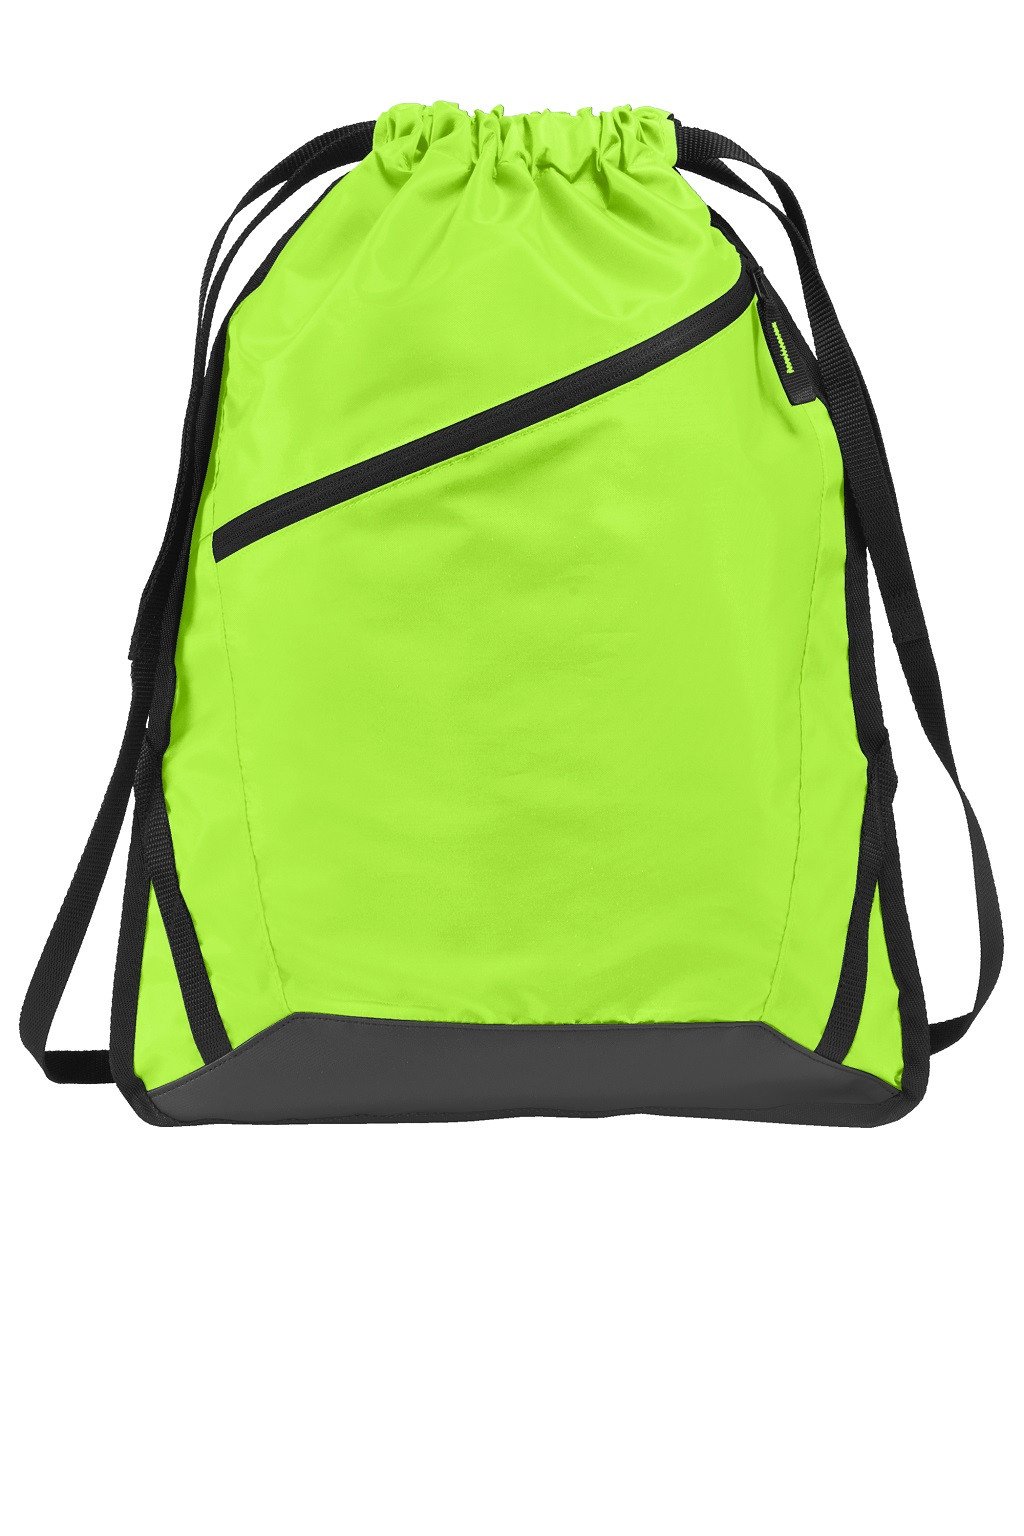 60 ct Zip-It Drawstring Backpack with Adjustable Straps - By Case